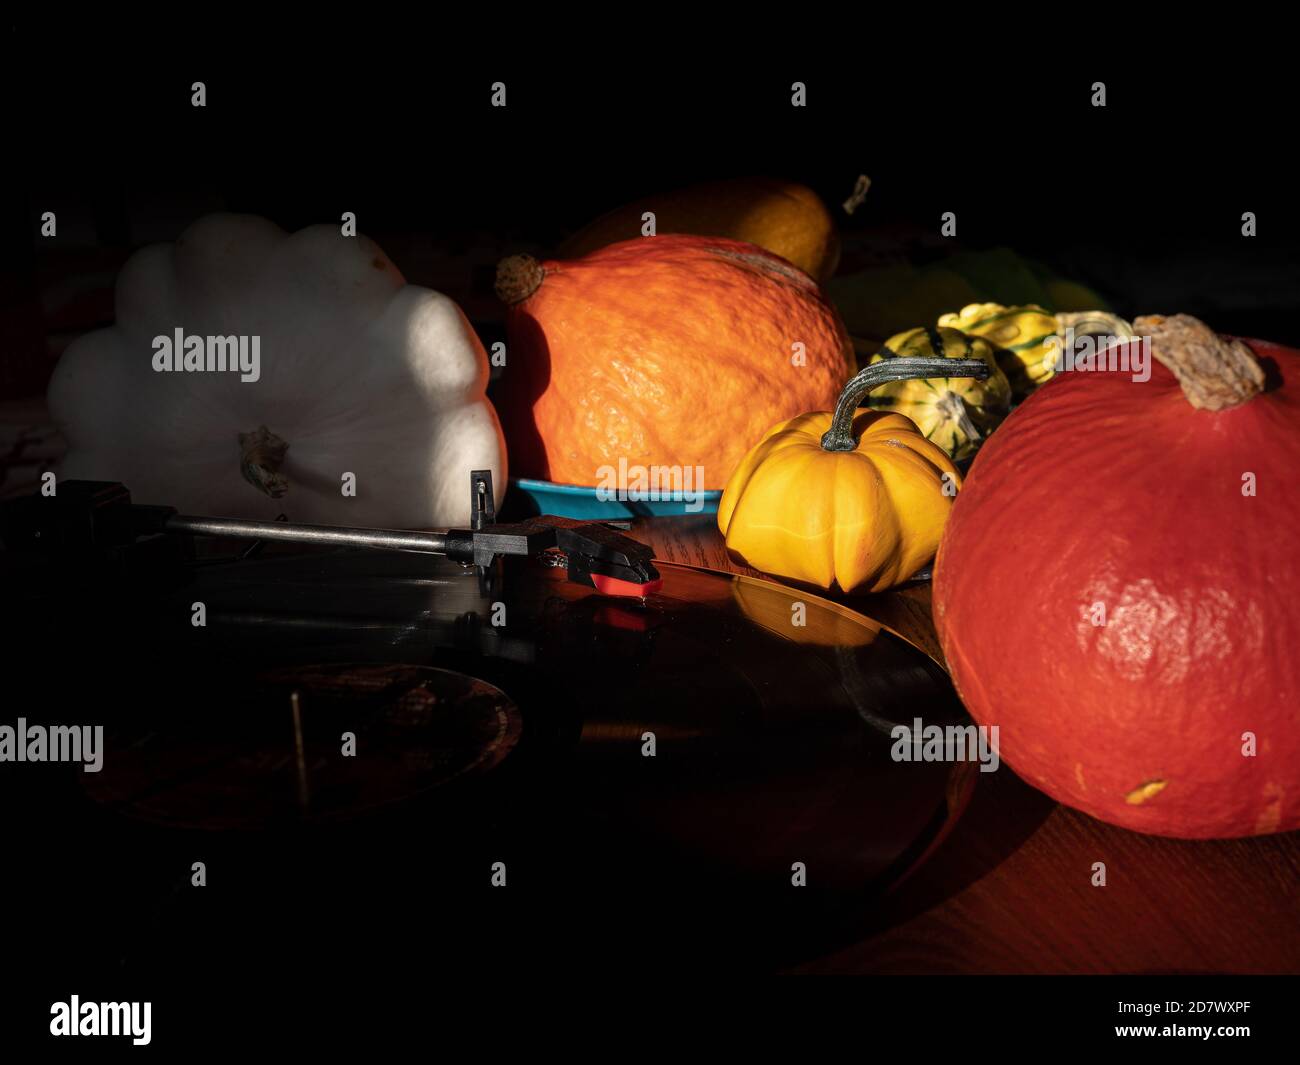 Halloween time with old gramophone on plates and colorful pumpkins in the background Stock Photo